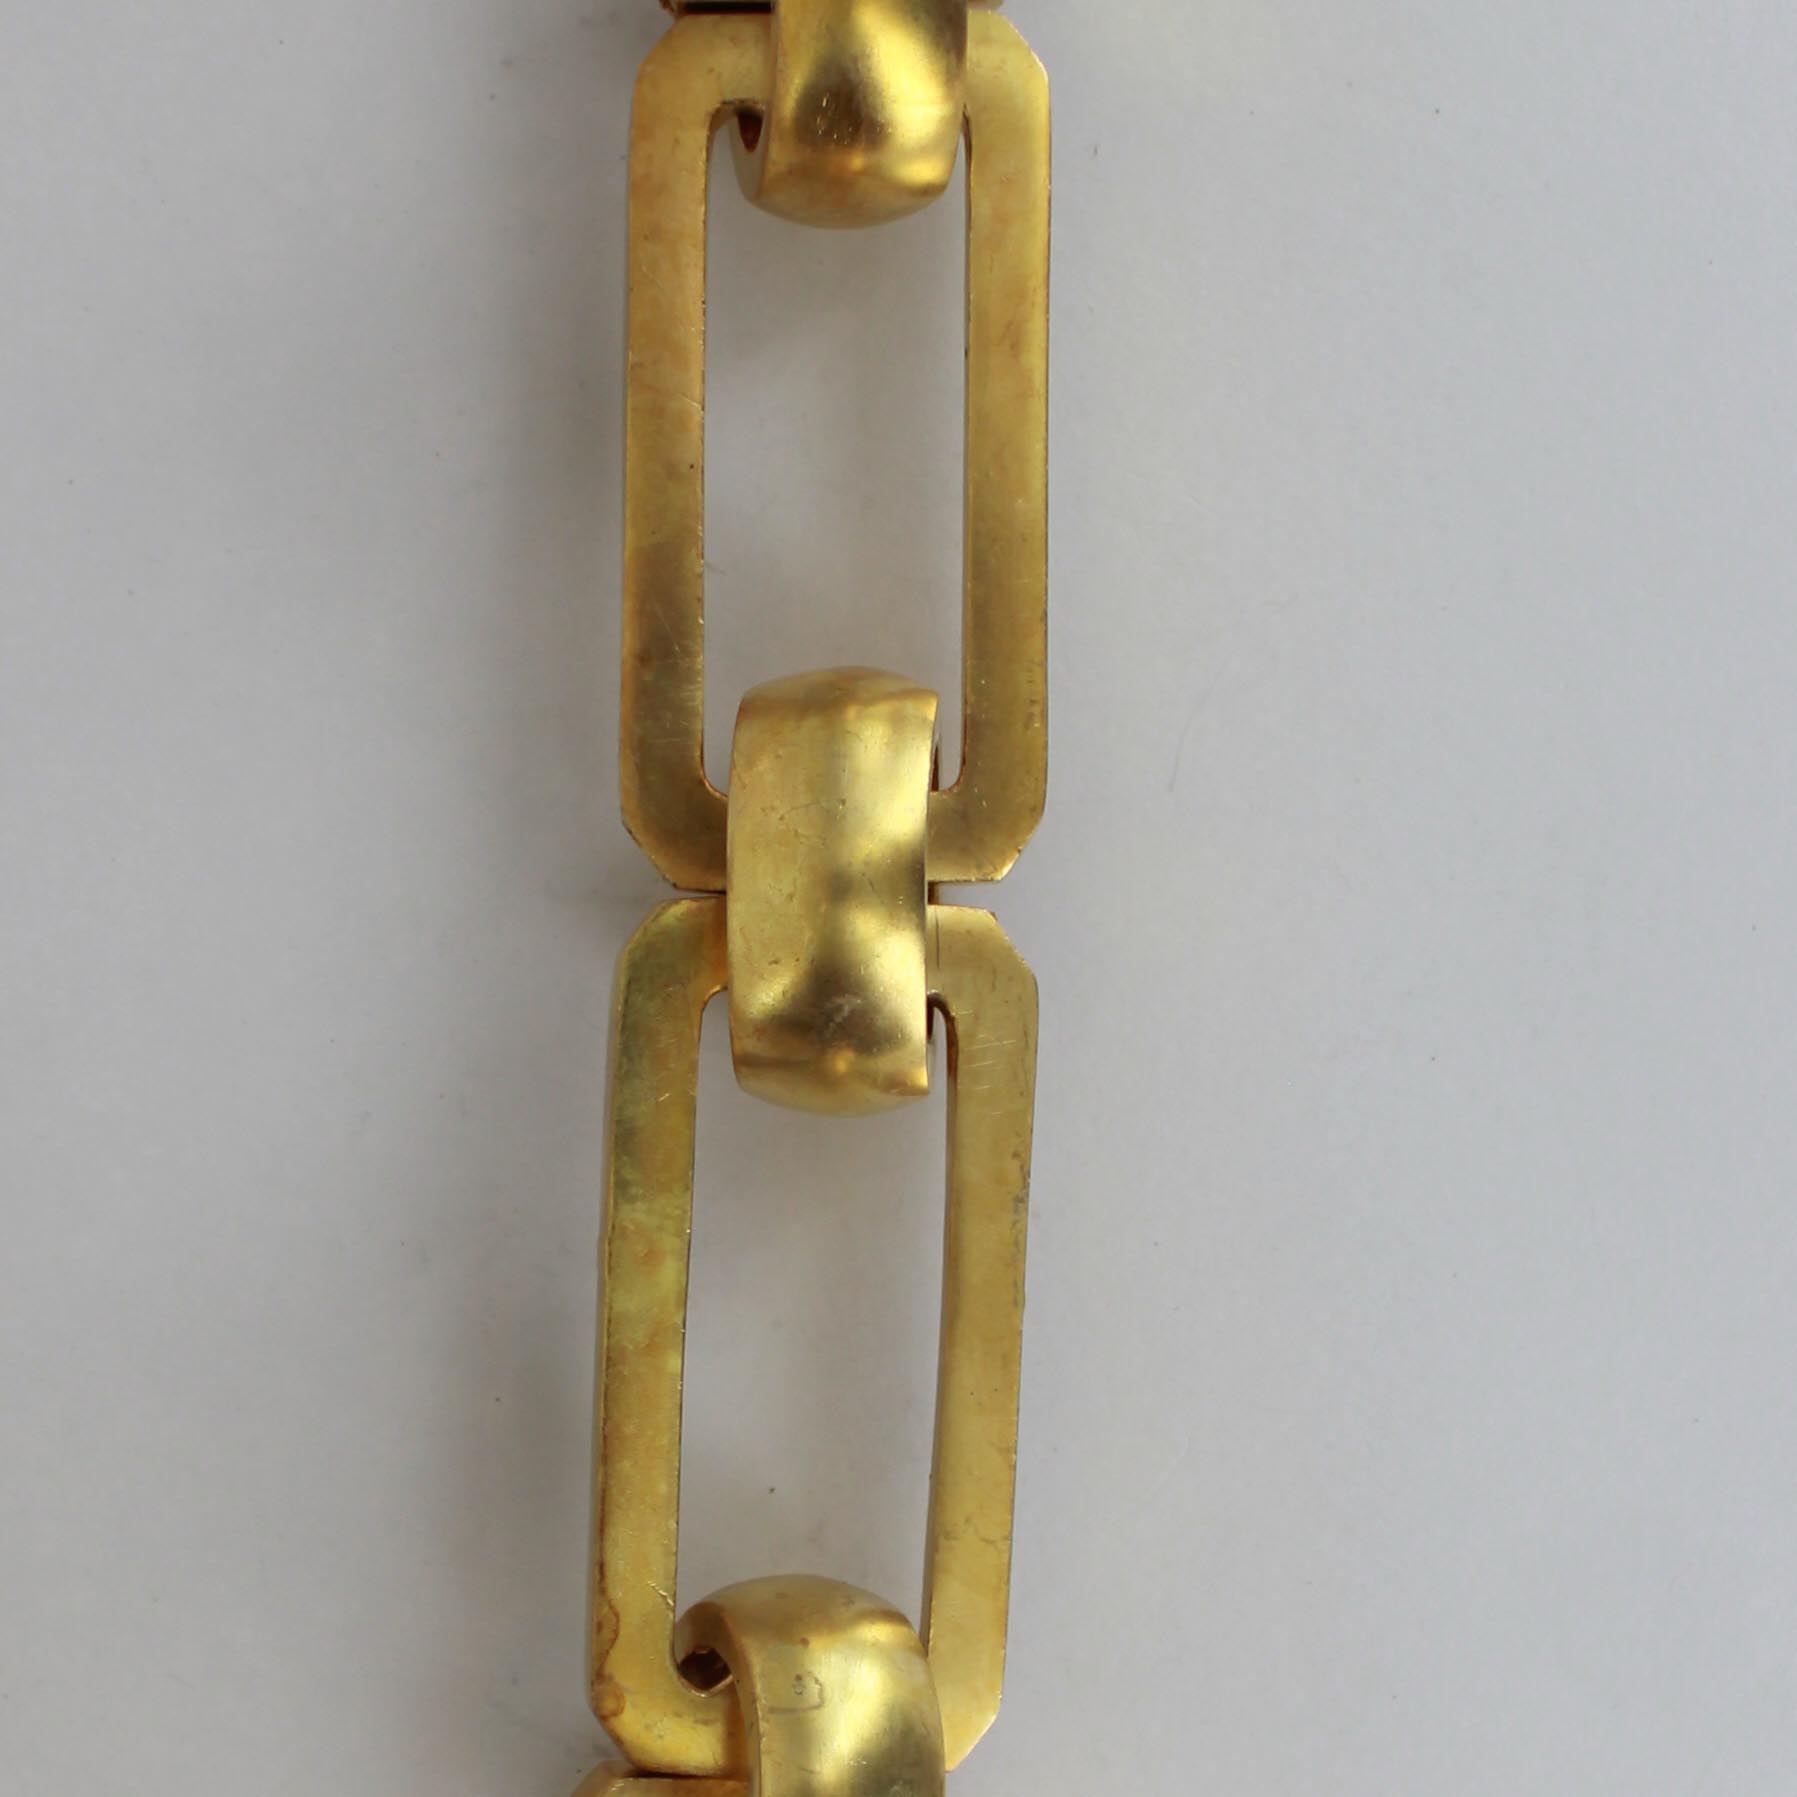 UNFINISHED BRASS HAND MADE RECTANGULAR SHAPE CHAIN WITH ROUND JOINING LINKS